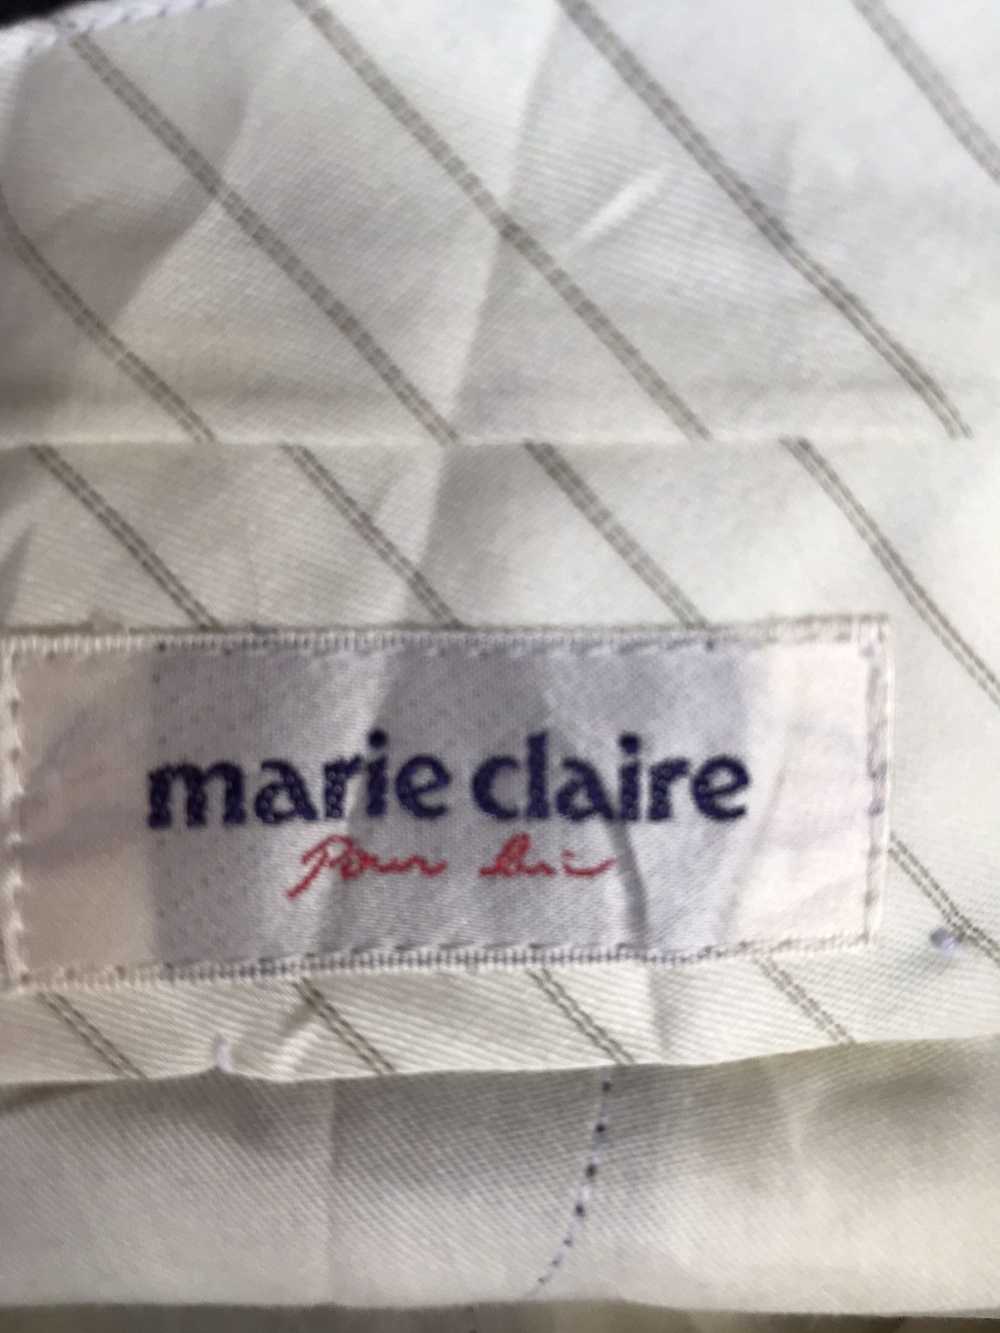 Japanese Brand Marie Claire Corduroy Pants - image 9